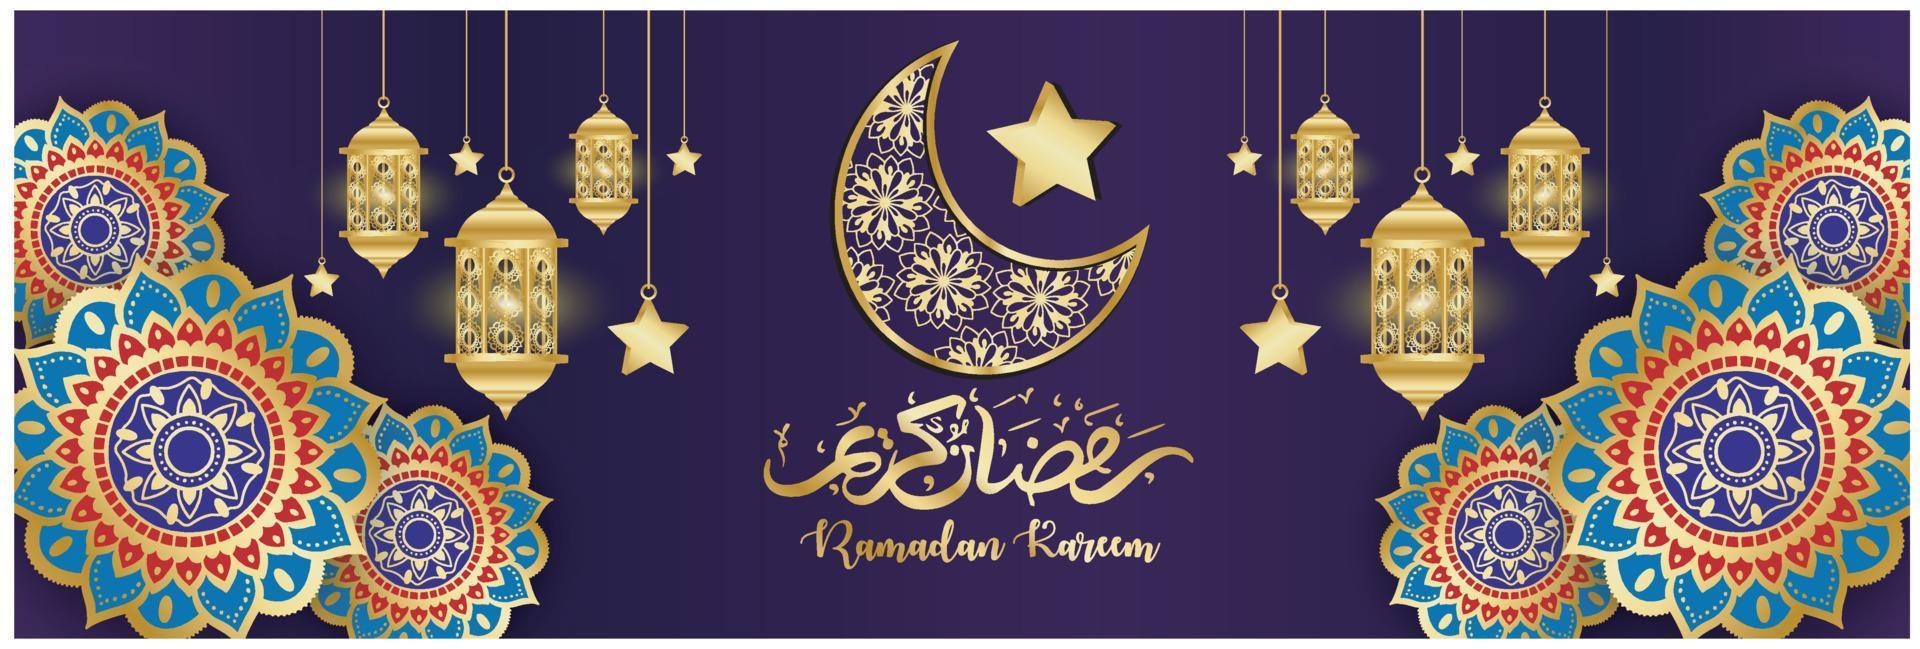 Muslim new year background in the month of ramadan islamic illustration vector